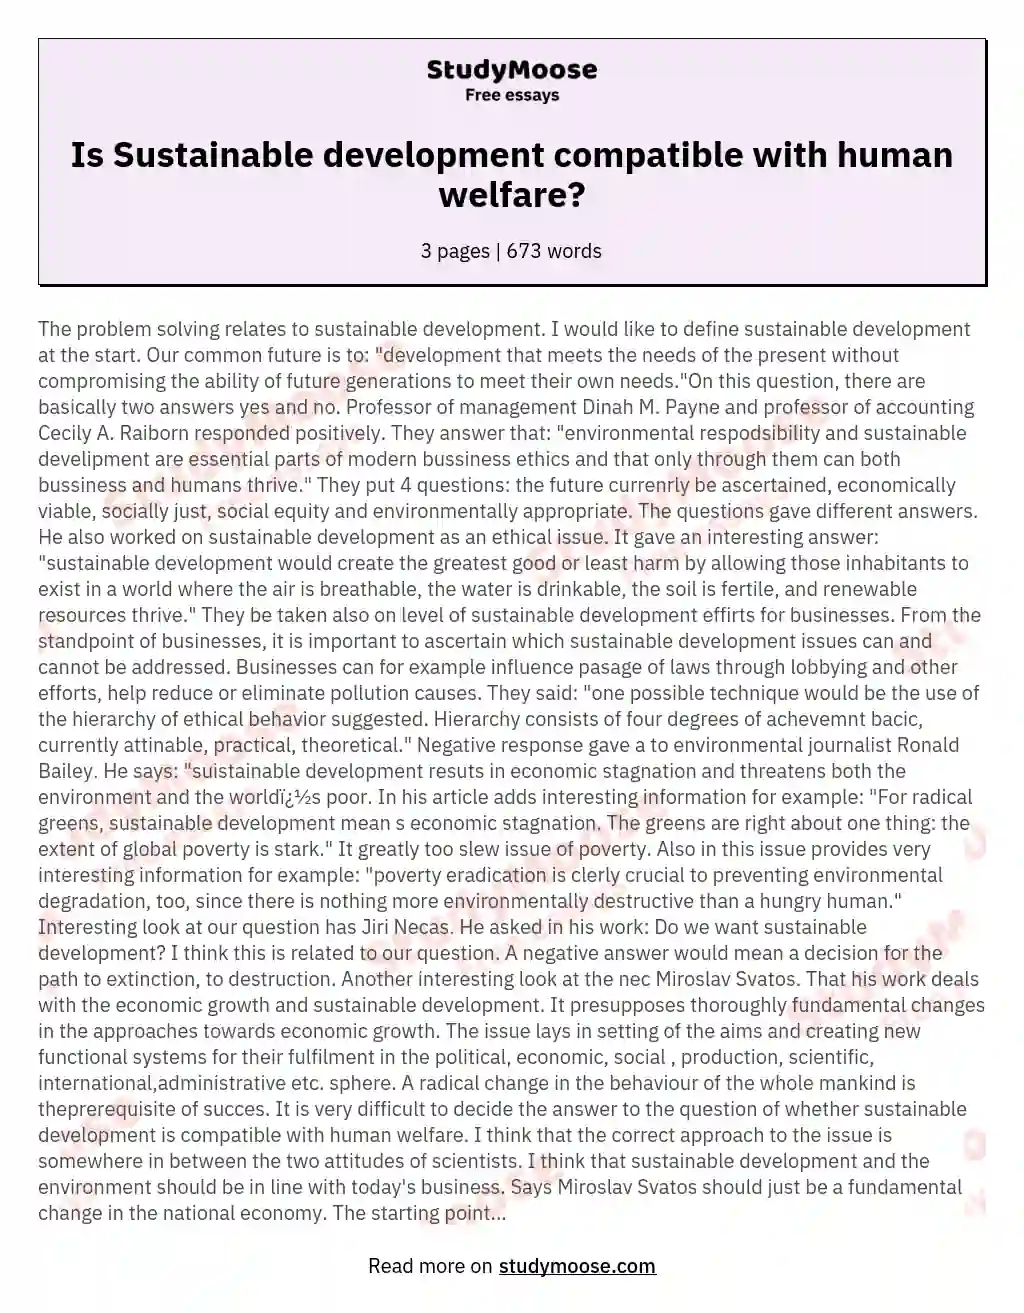 Is Sustainable development compatible with human welfare? essay